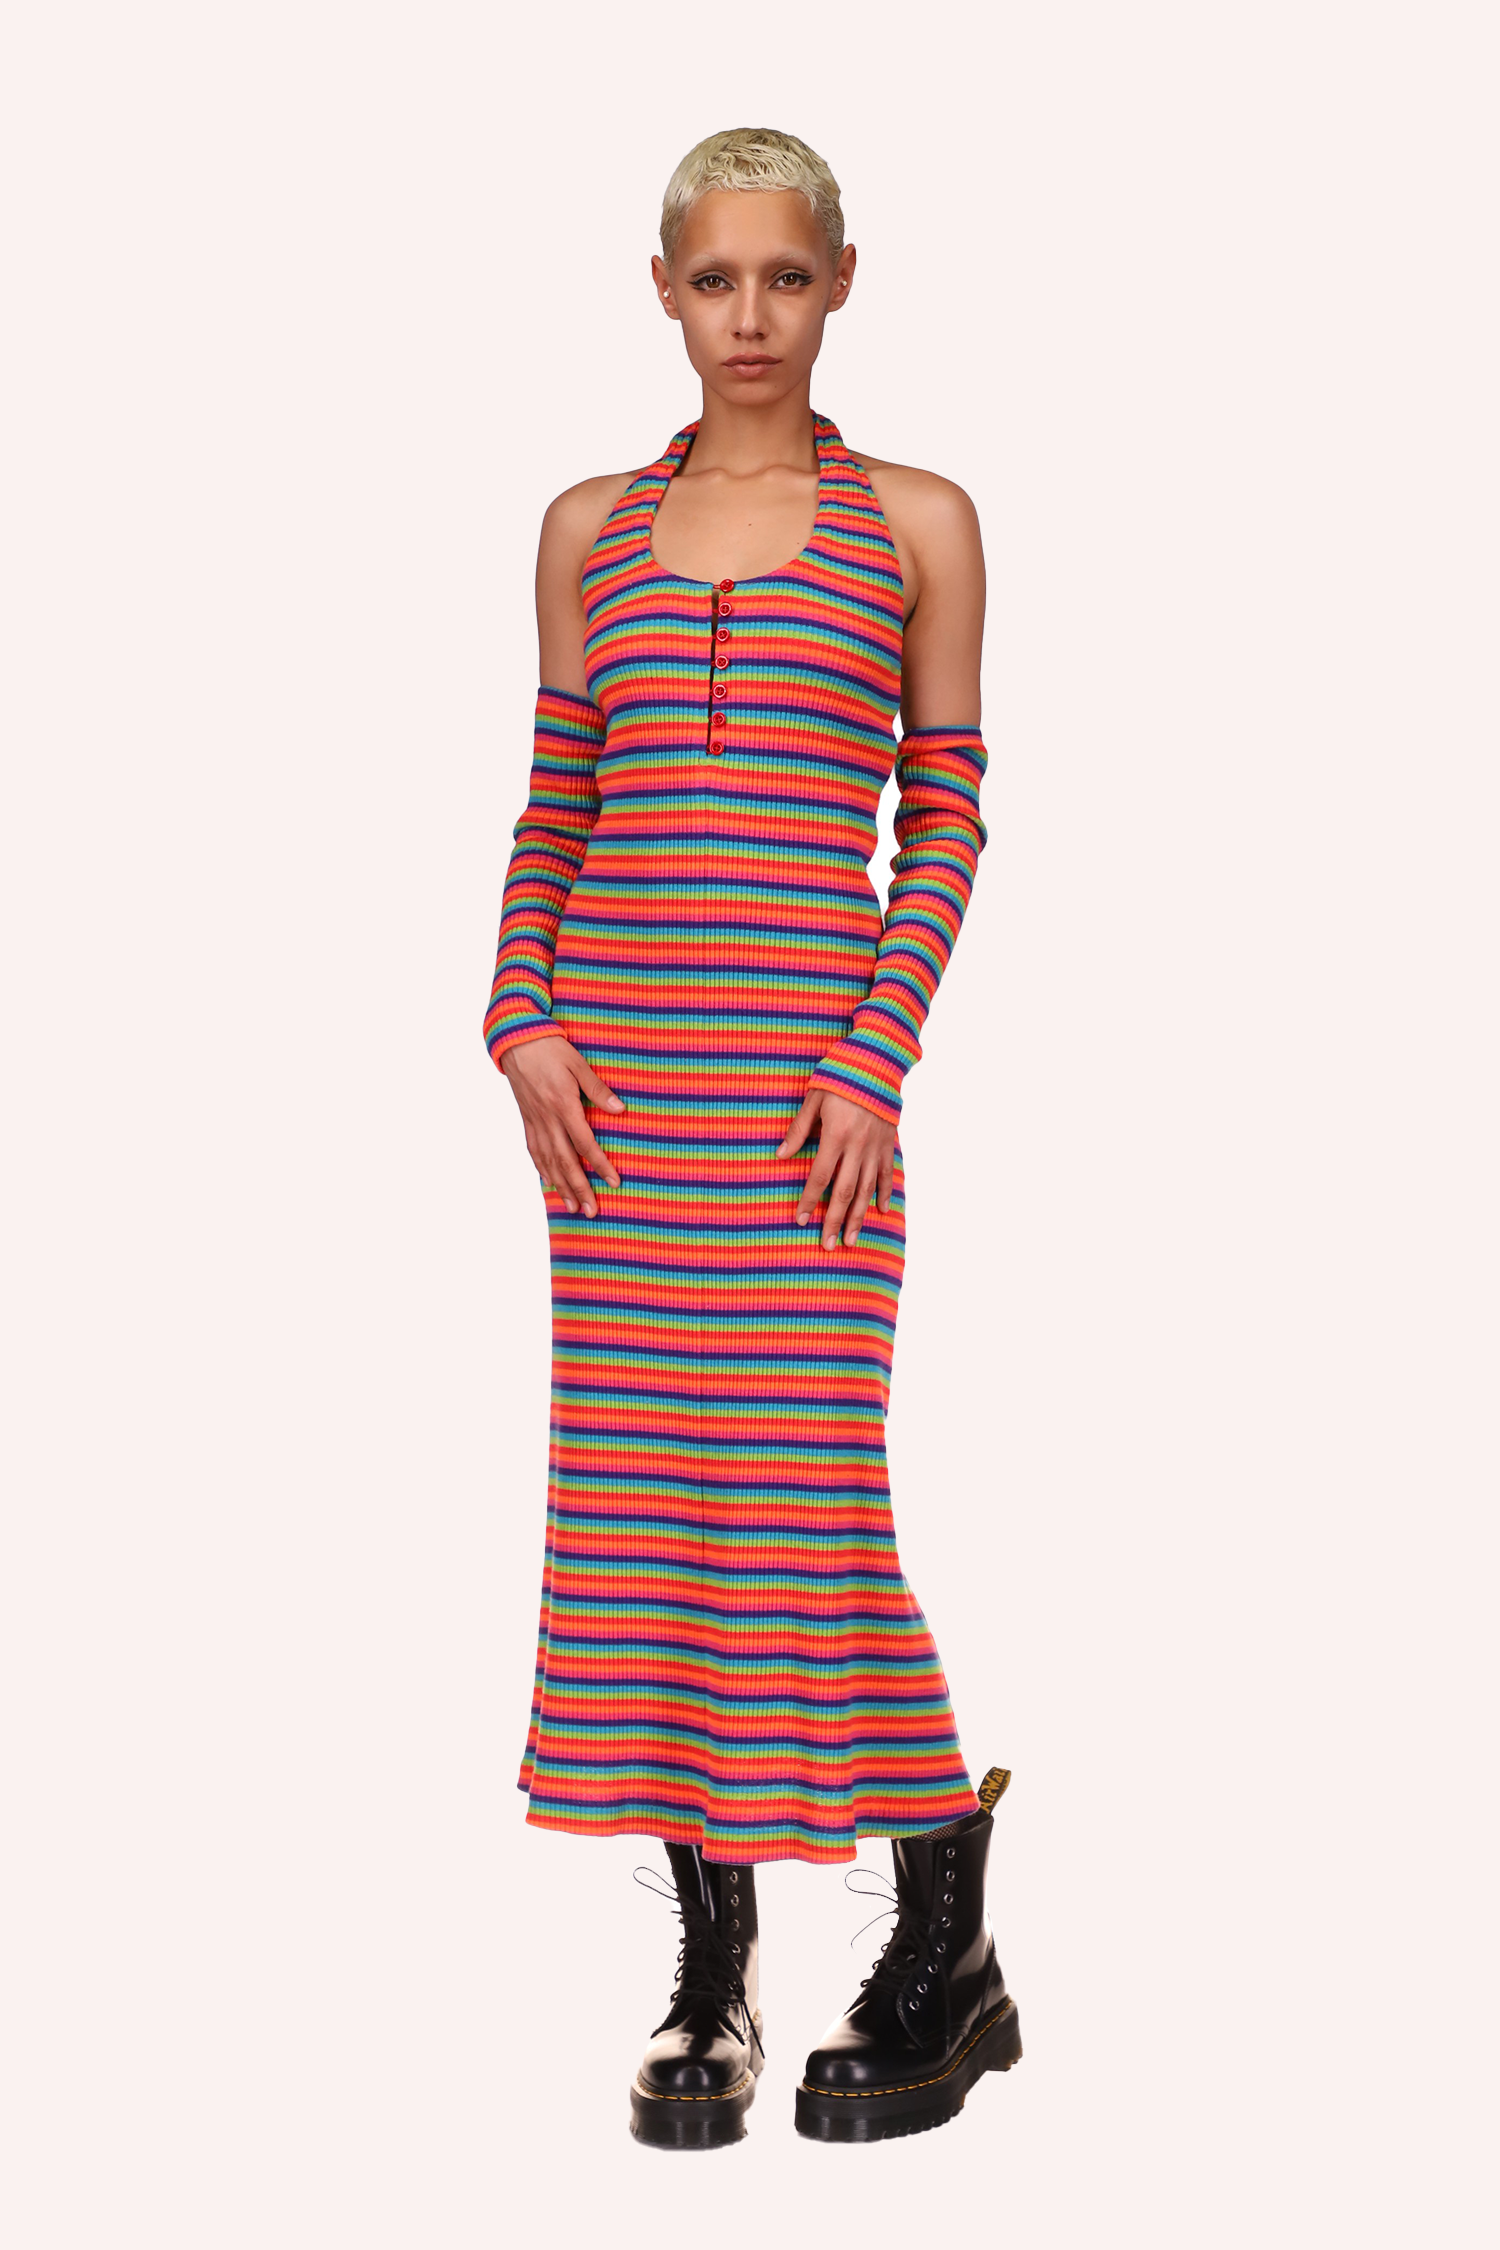 Mid-calf long rainbow dress, sleeveless, bust fabric goes around the neck, 7-button on front collar.